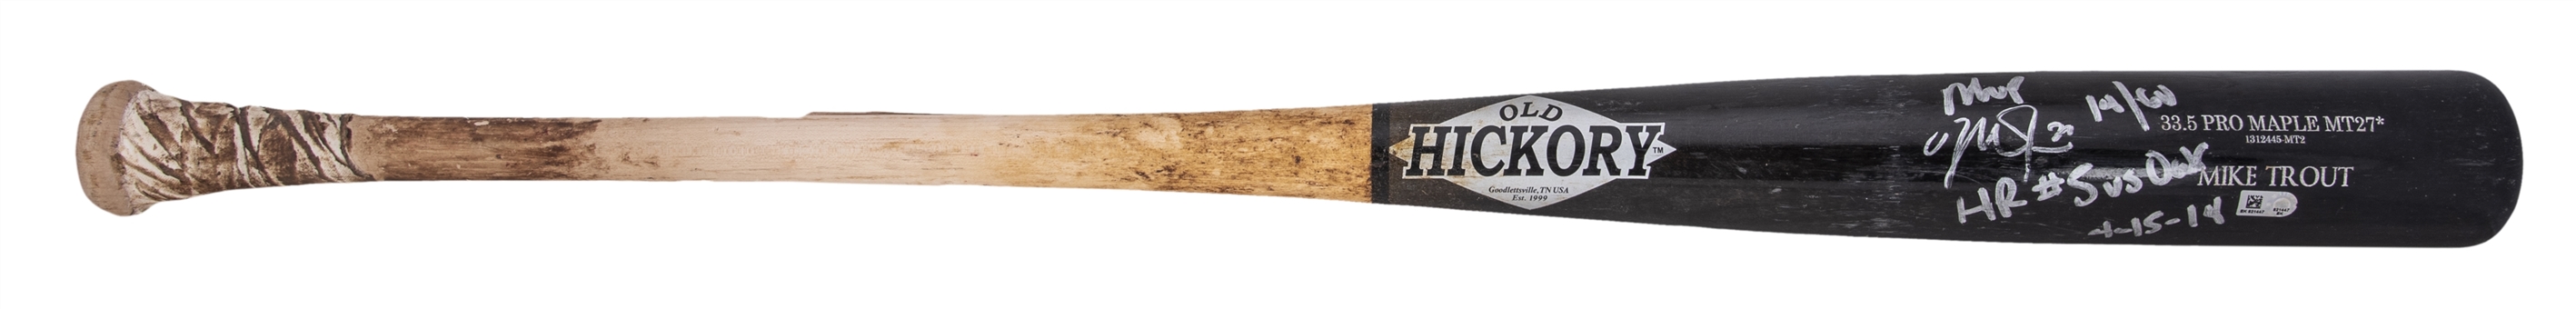 2014 Mike Trout Game Used & Signed Old Hickory MT27* Model Bat Used to Hit Game Tying 9th Inning Home Run on April 15, 2014 vs Oakland As - First MVP Season (MLB Authenticated & Anderson LOA)